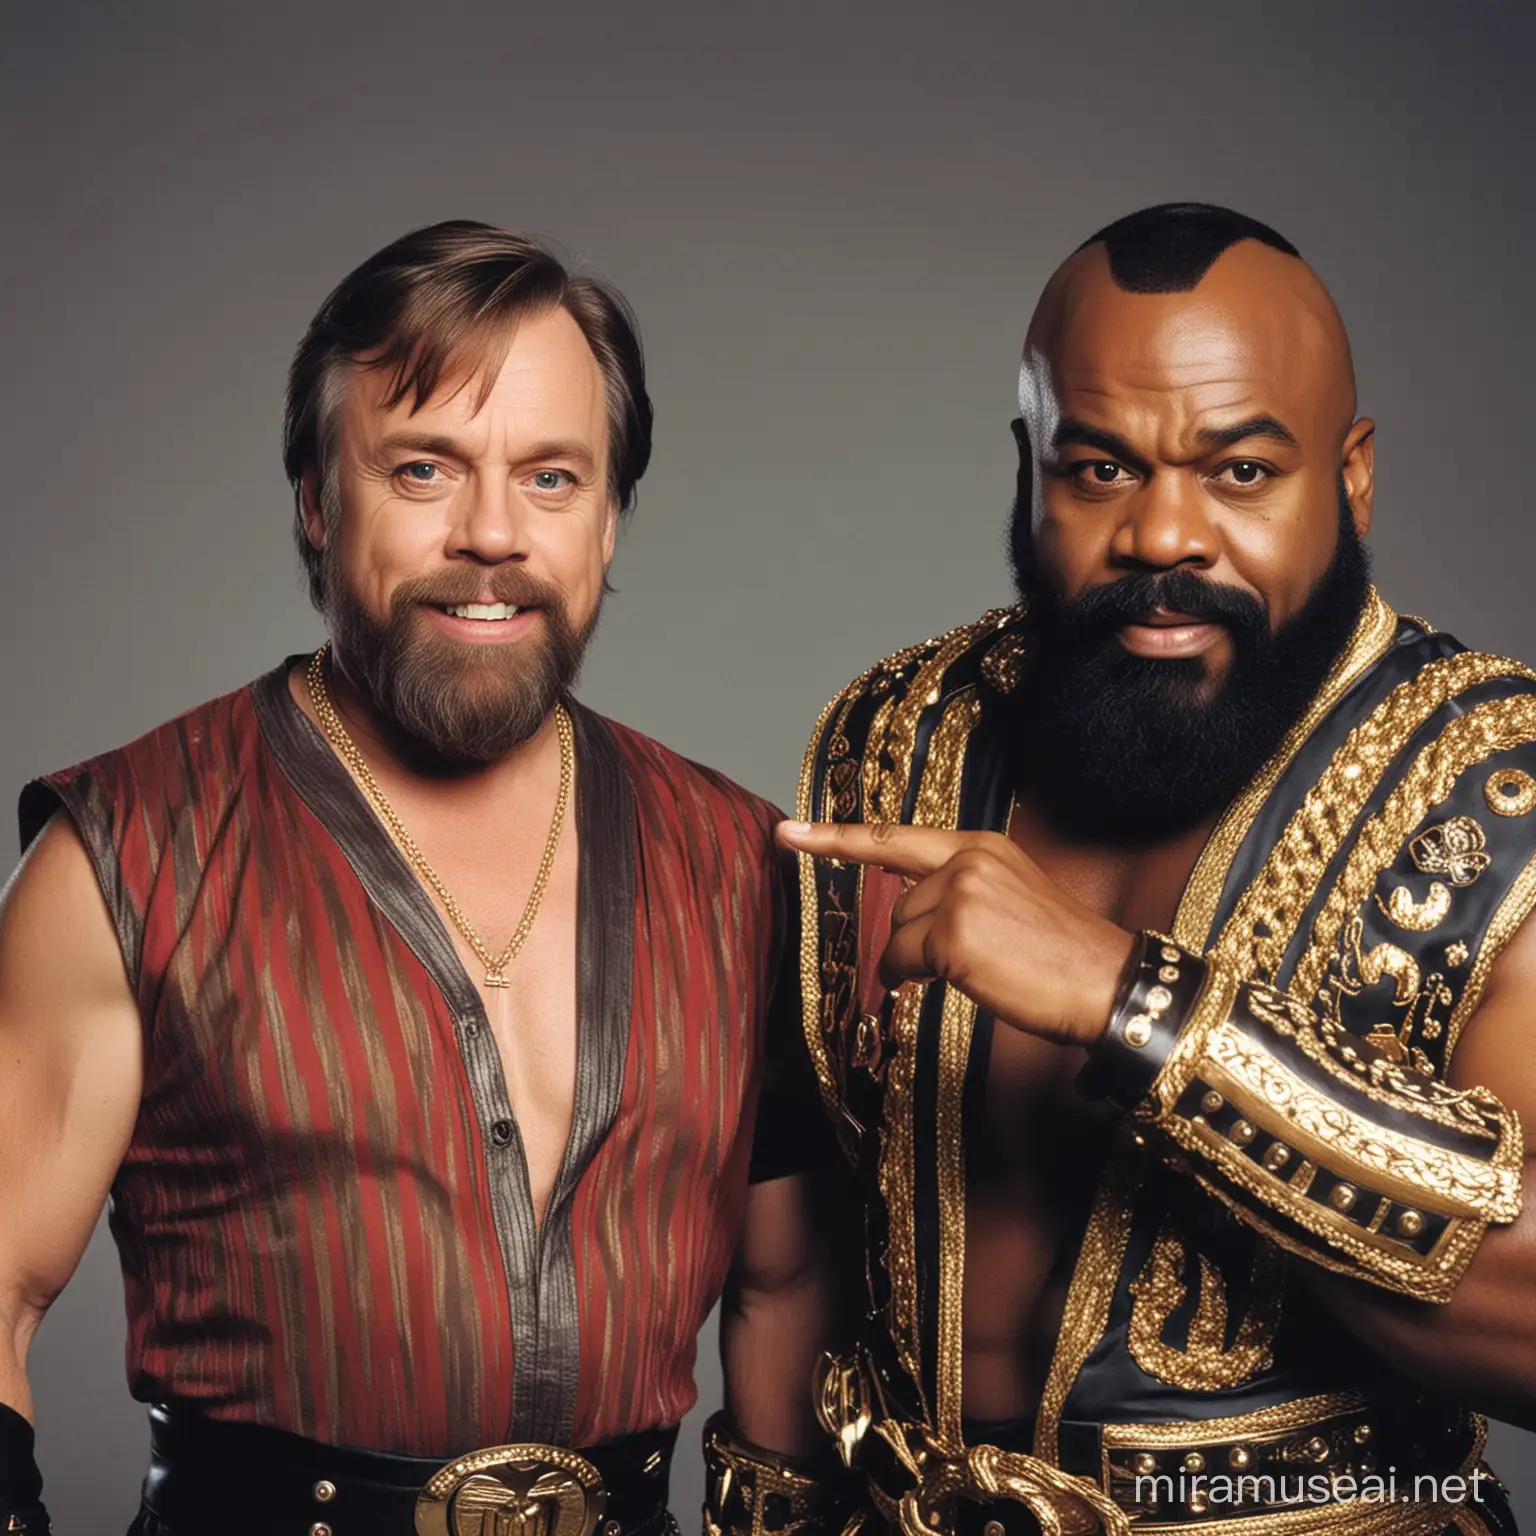 Mark Hamill and Mr T in Dynamic Action Pose